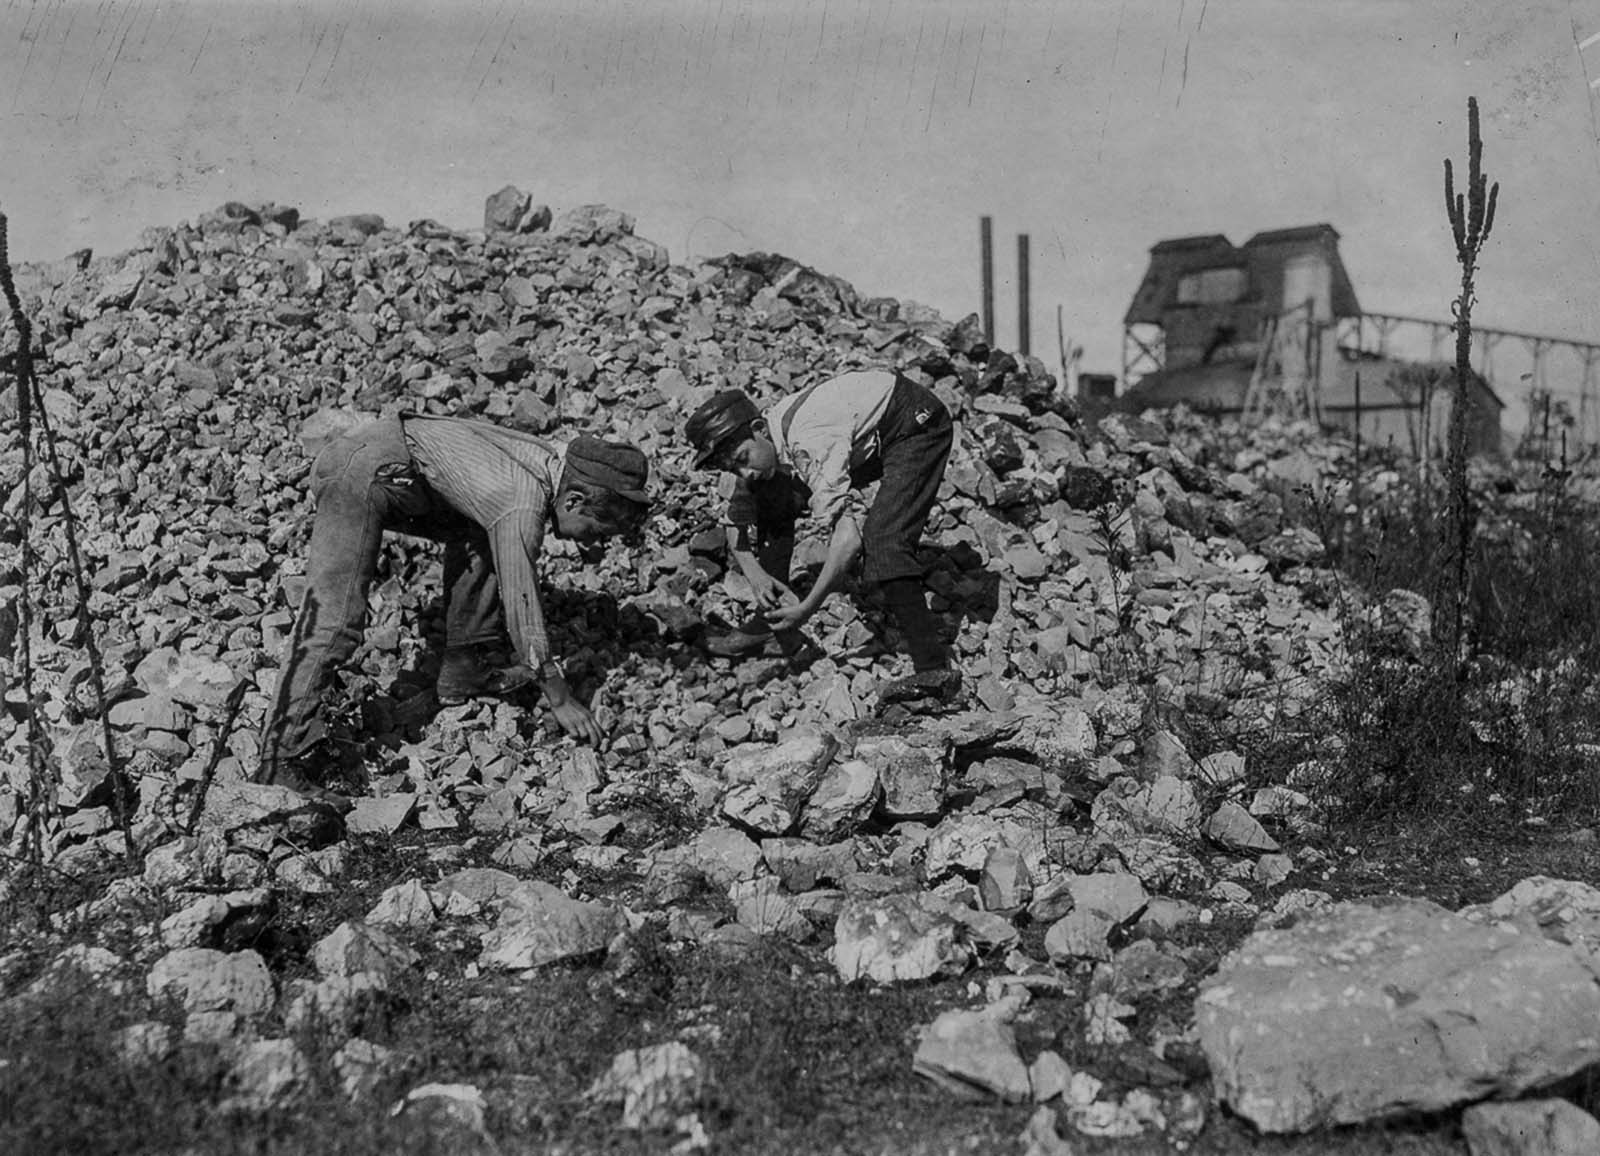 Basil Roberts and James Hopper, both 12, cull through waste from a zinc mine in Aurora, Missouri, 1910